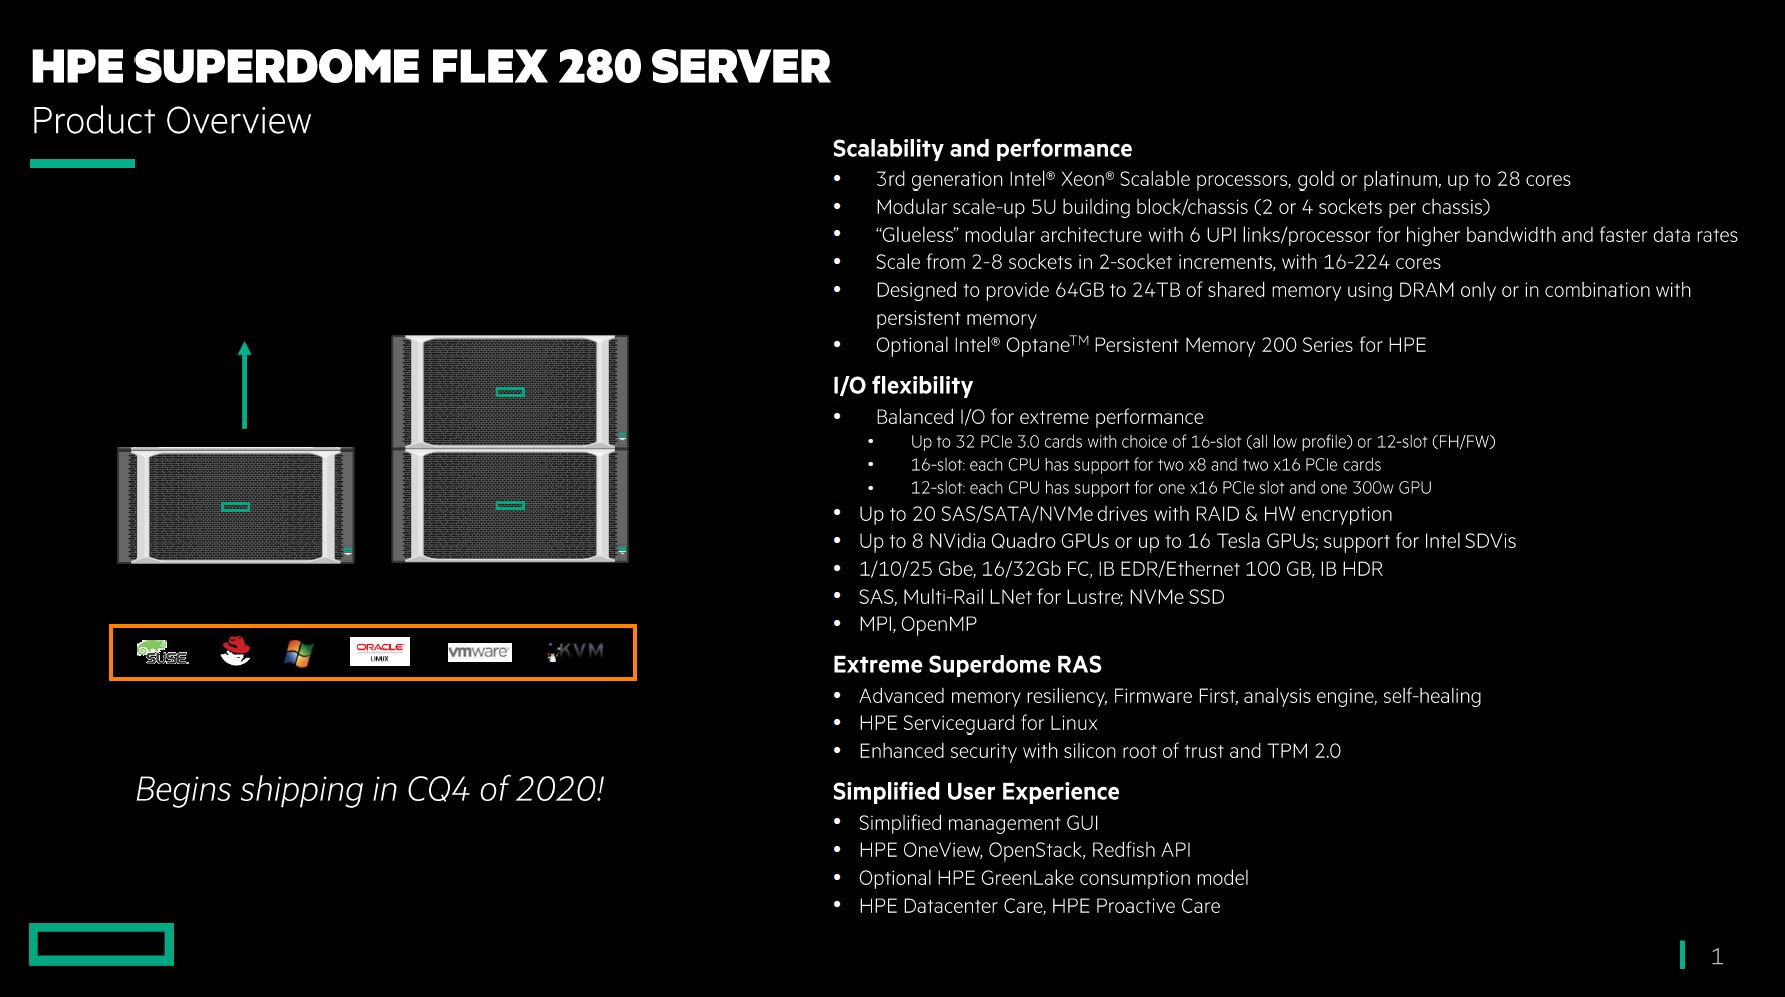 HPE Superdome Flex 280 Key Specs And Features